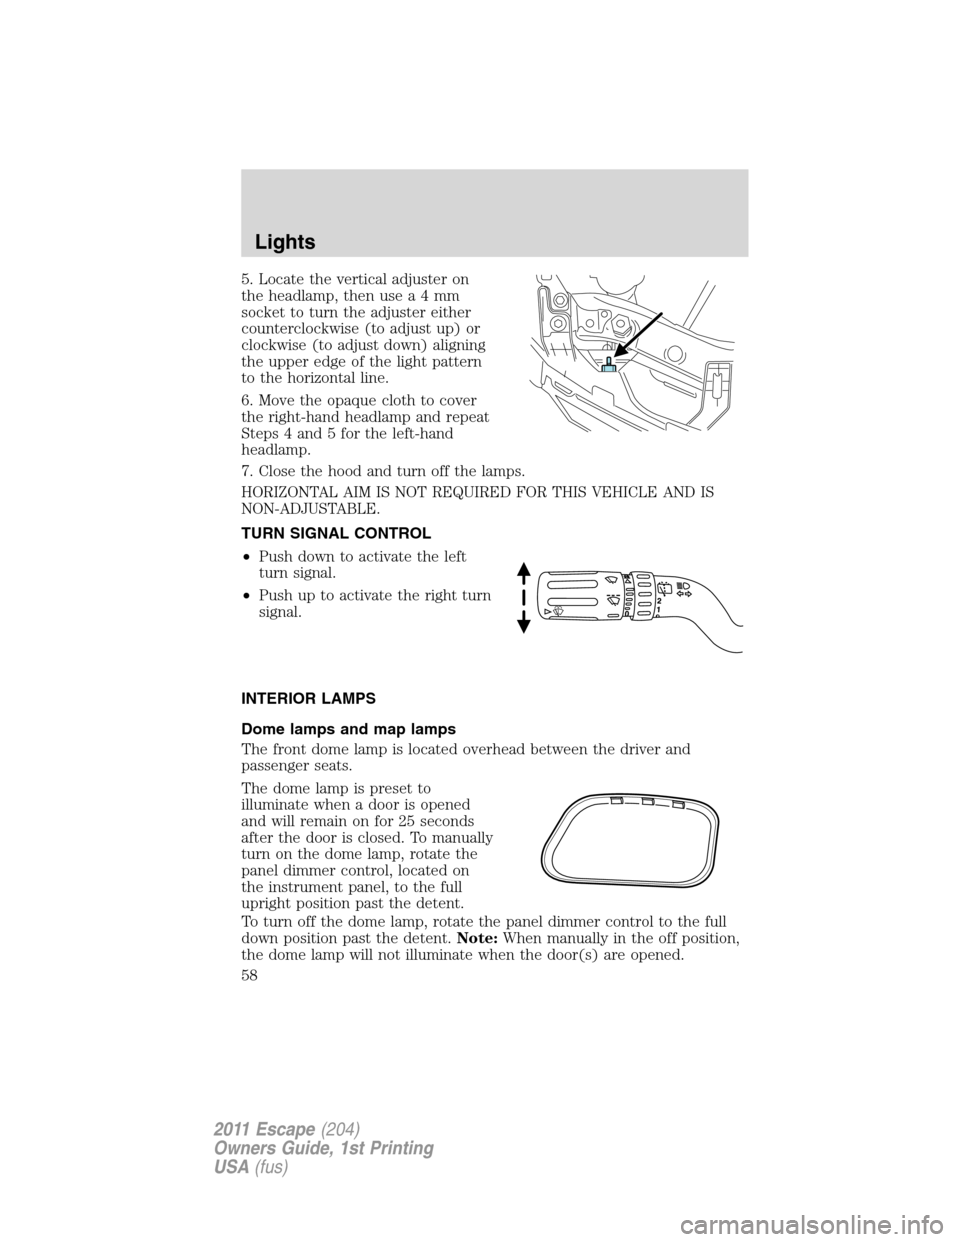 FORD ESCAPE 2011 2.G Owners Manual 5. Locate the vertical adjuster on
the headlamp, then usea4mm
socket to turn the adjuster either
counterclockwise (to adjust up) or
clockwise (to adjust down) aligning
the upper edge of the light patt